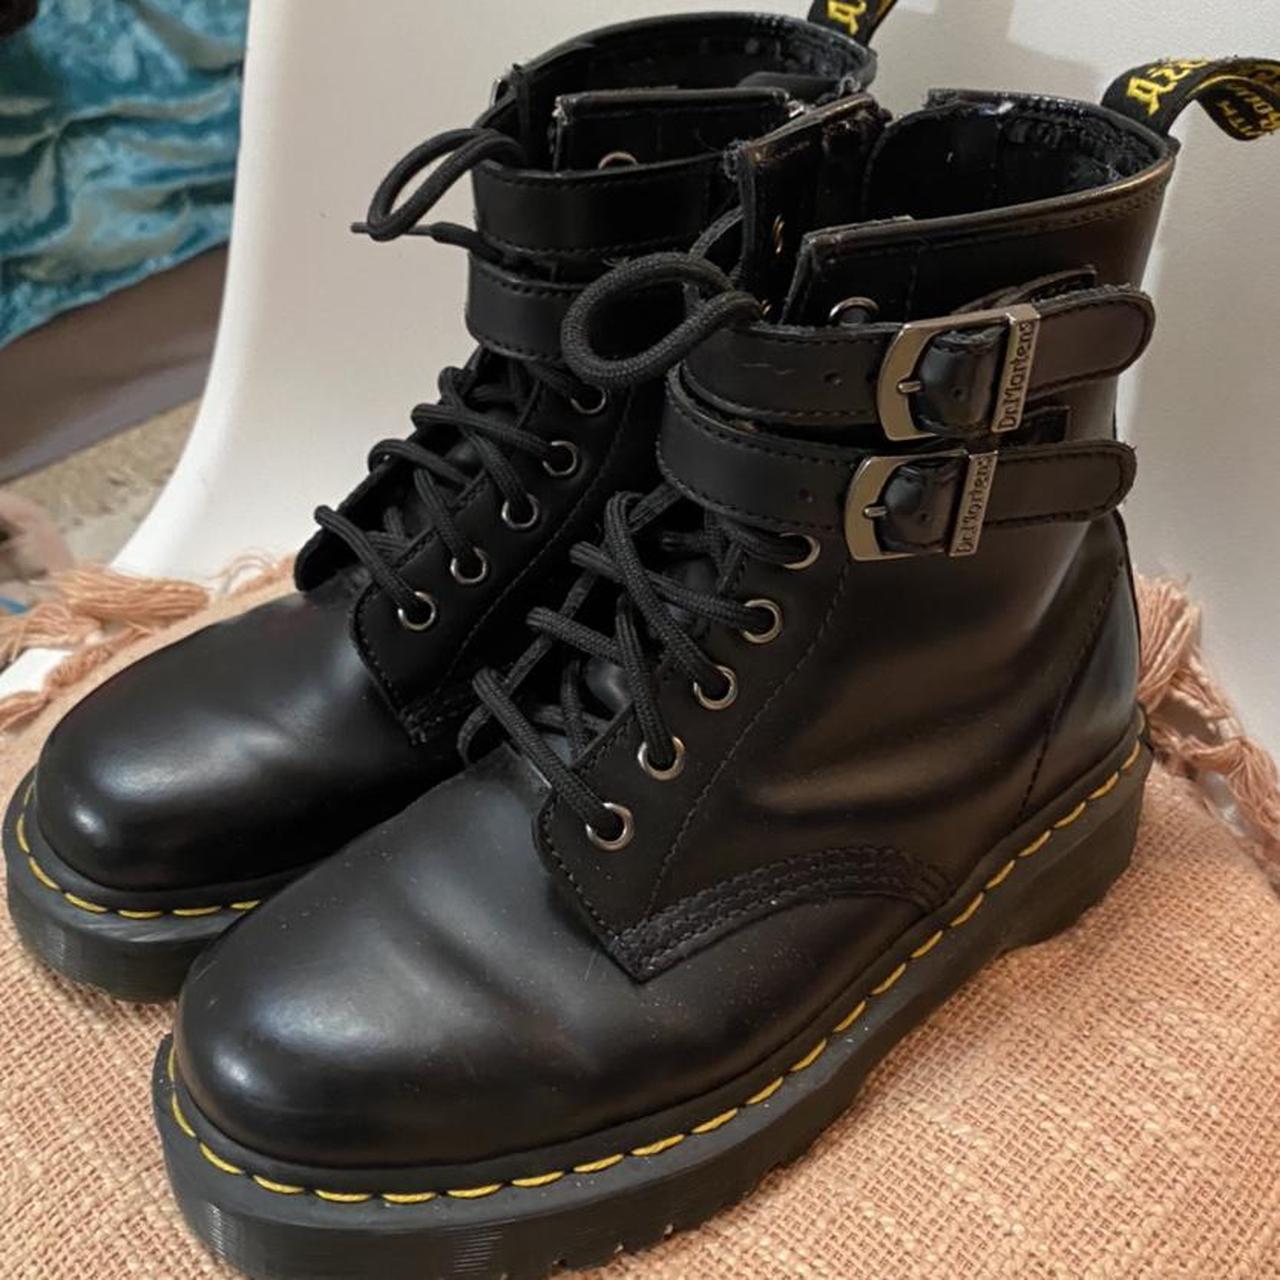 Product Image 3 - vegan leather doc martens! not